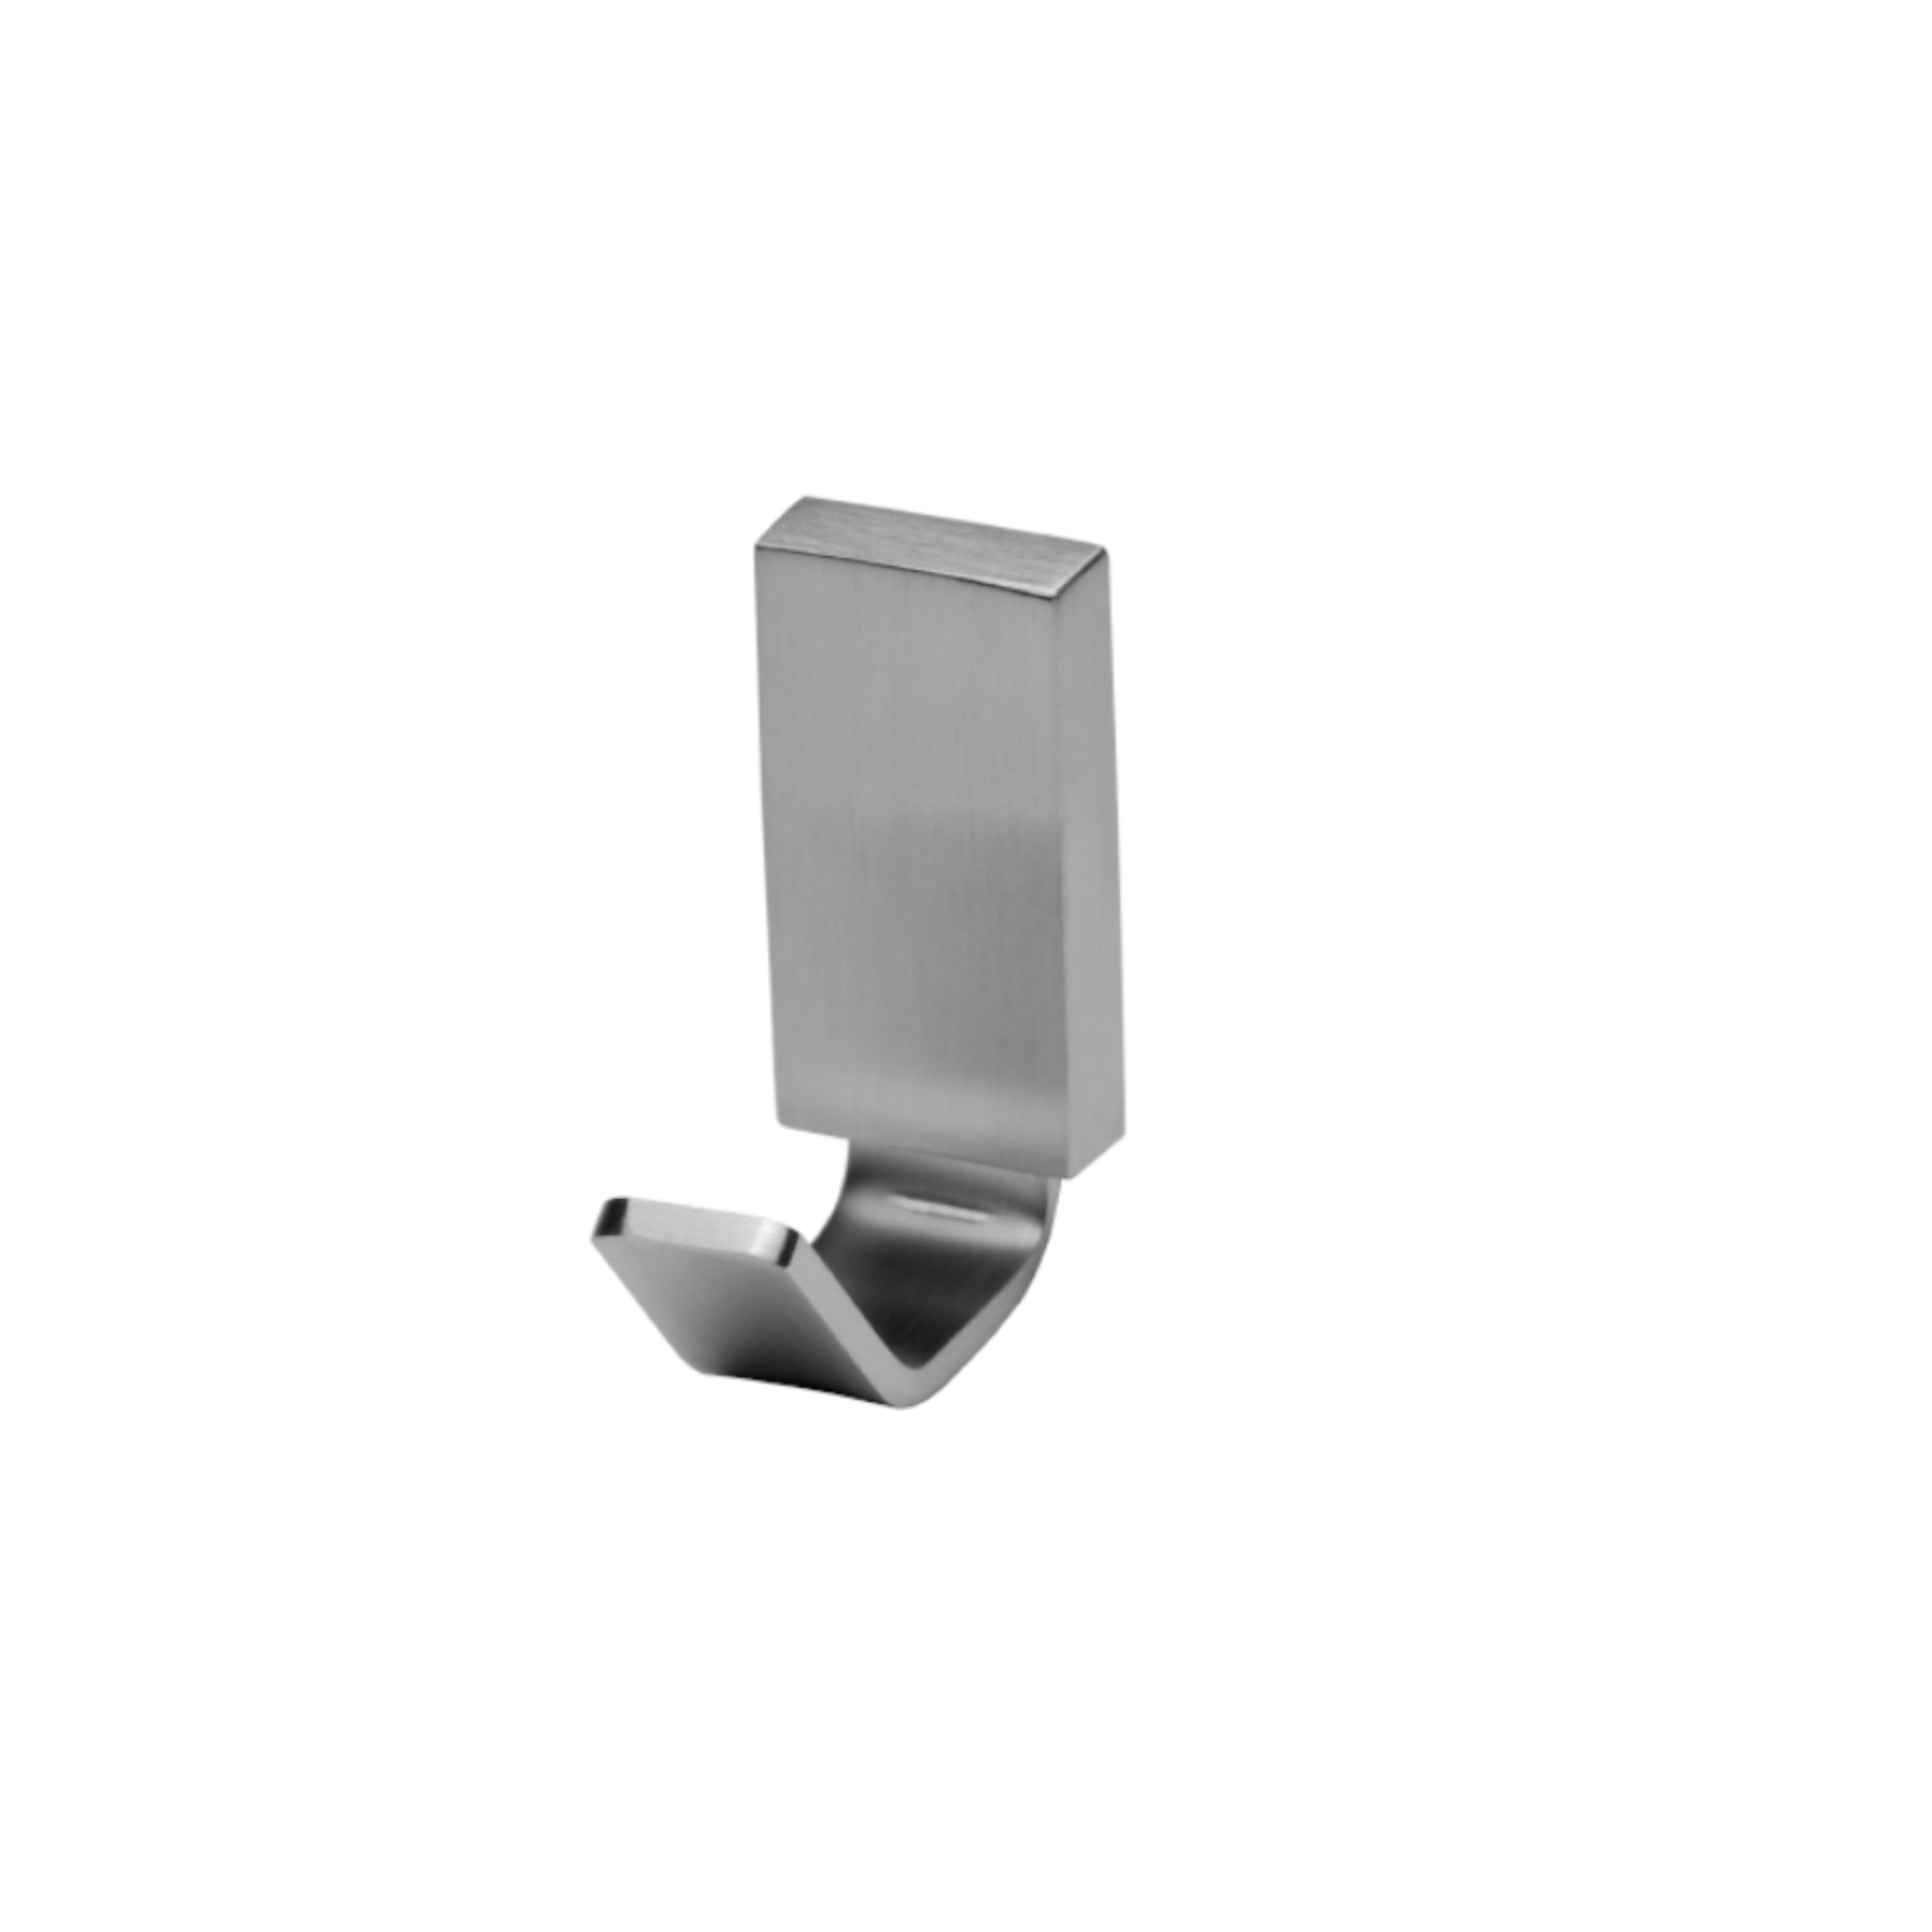 QS1521/SSS, Hook, Single Robe, Square, Satin Stainless Steel, QS